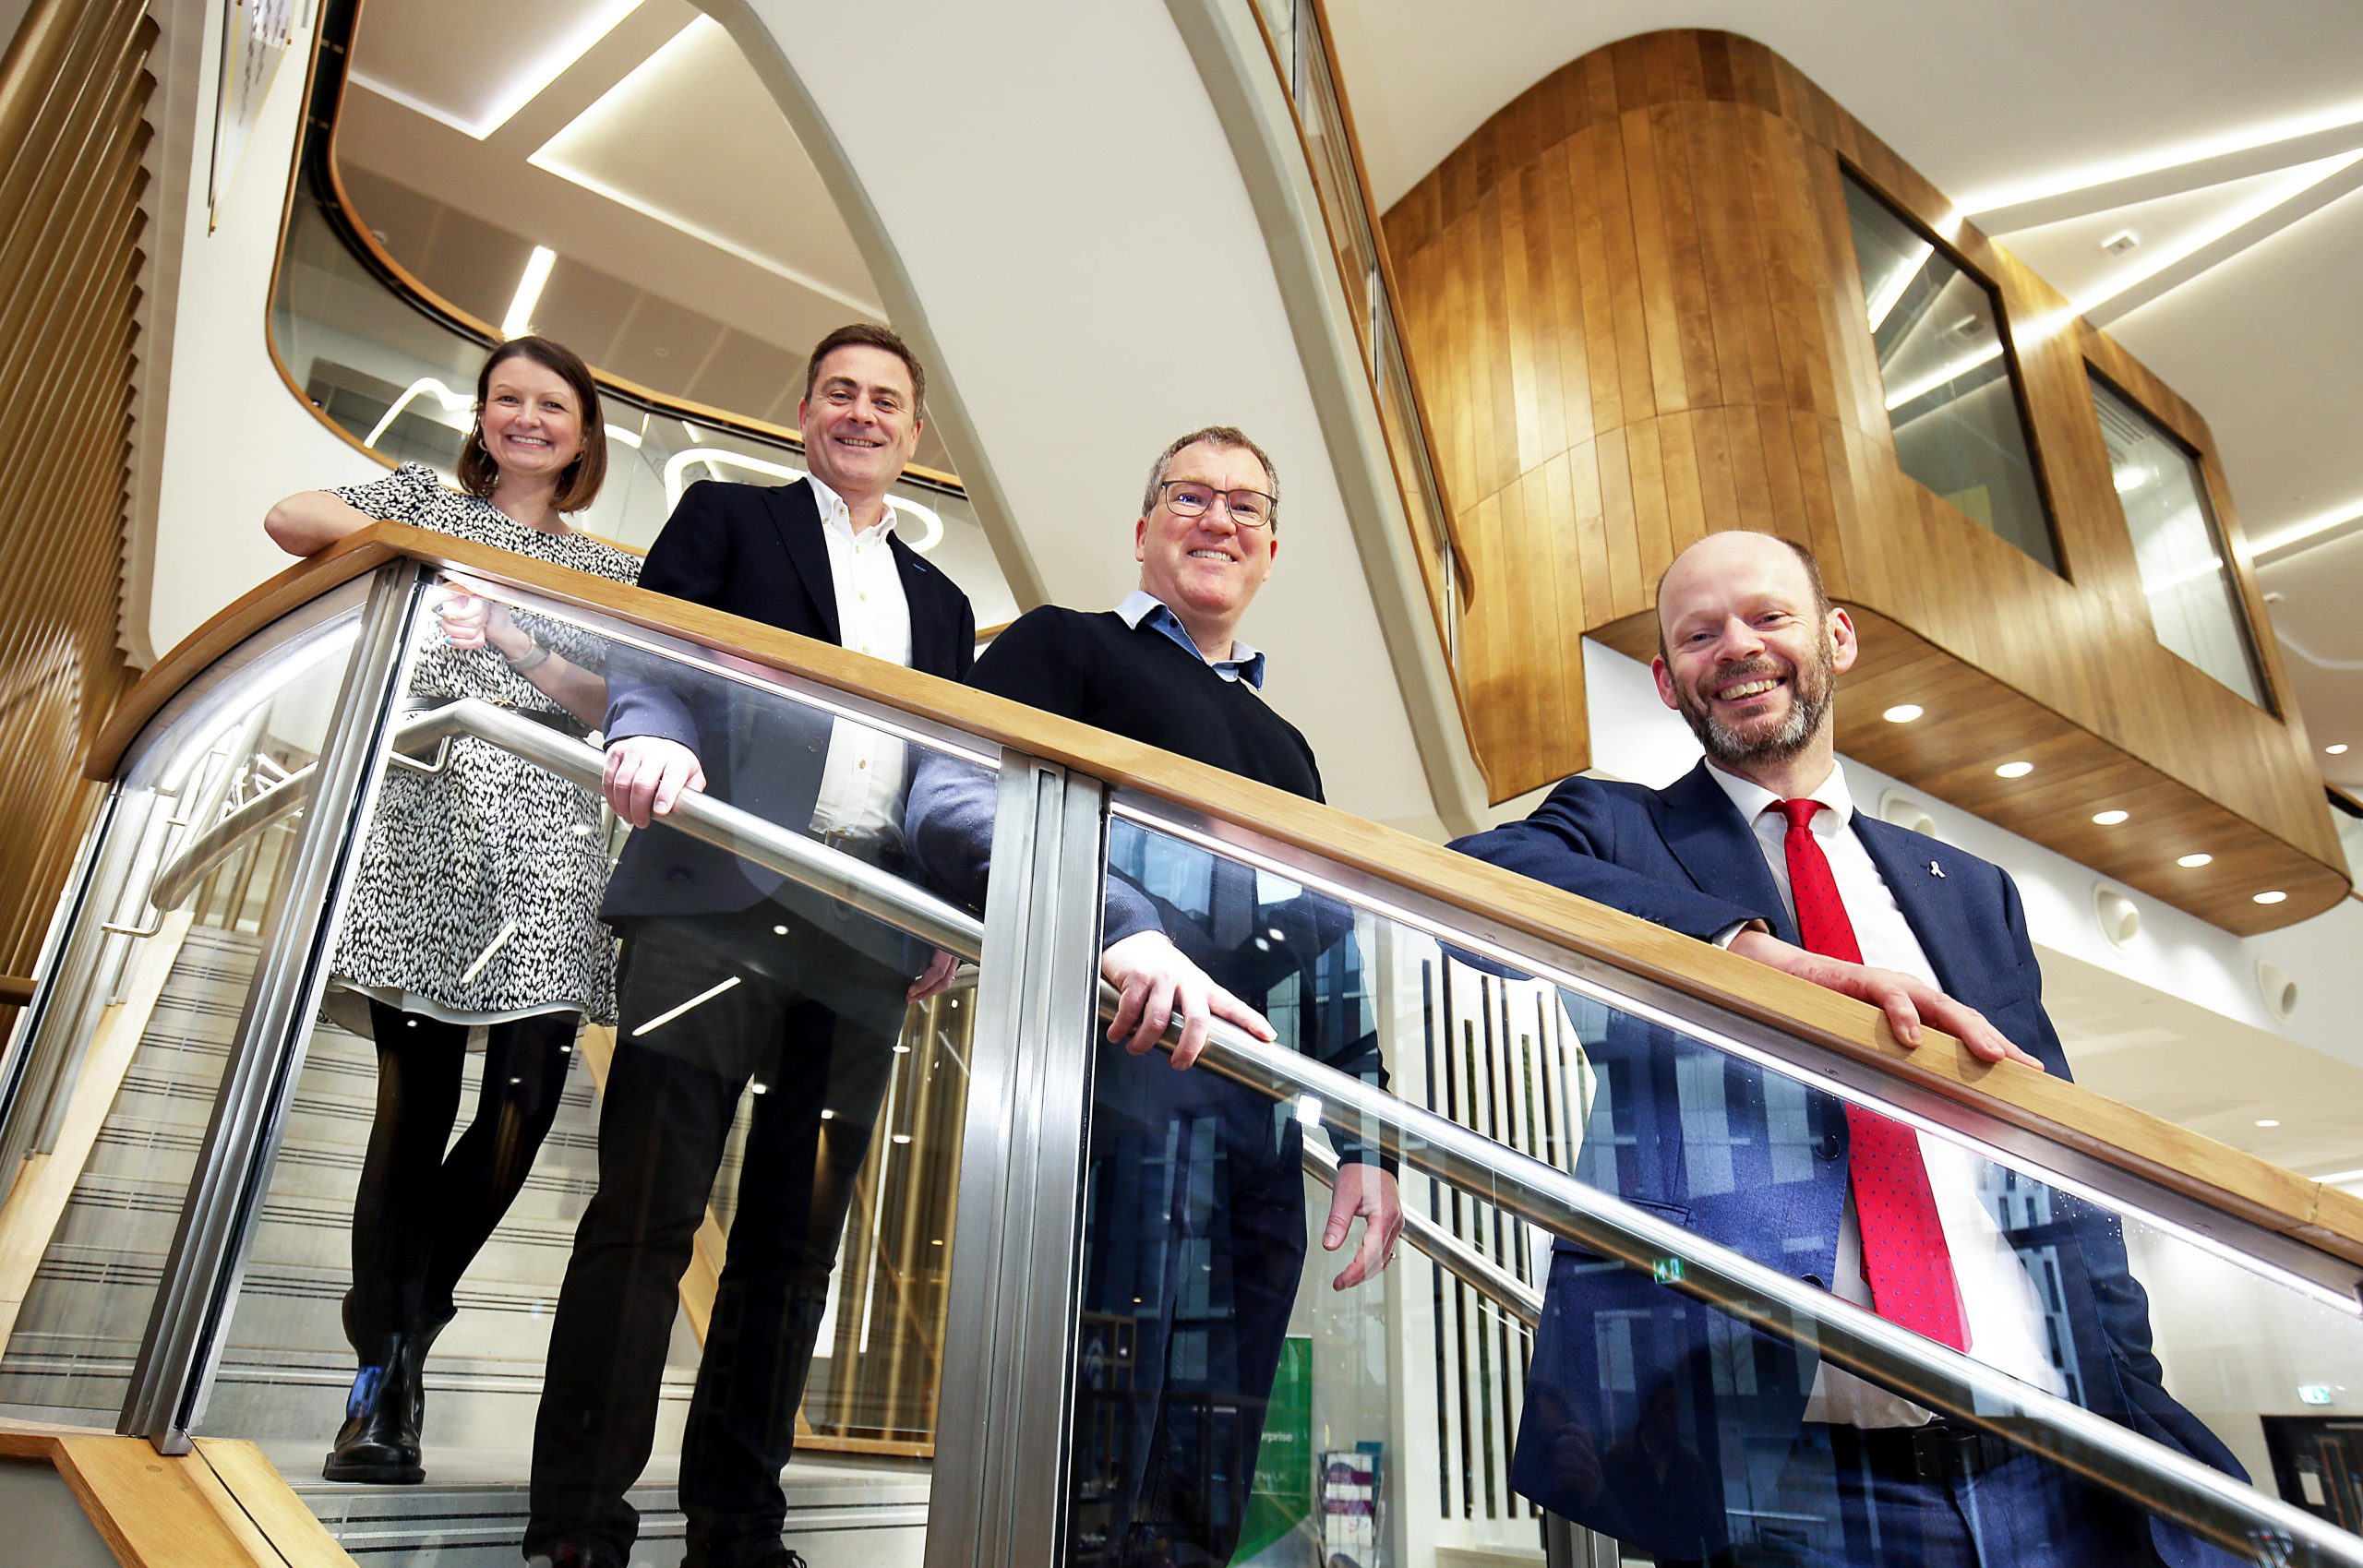 Jen, Graham, Ewan and Jamie all stood on spiralling staircase smiling at camera below them